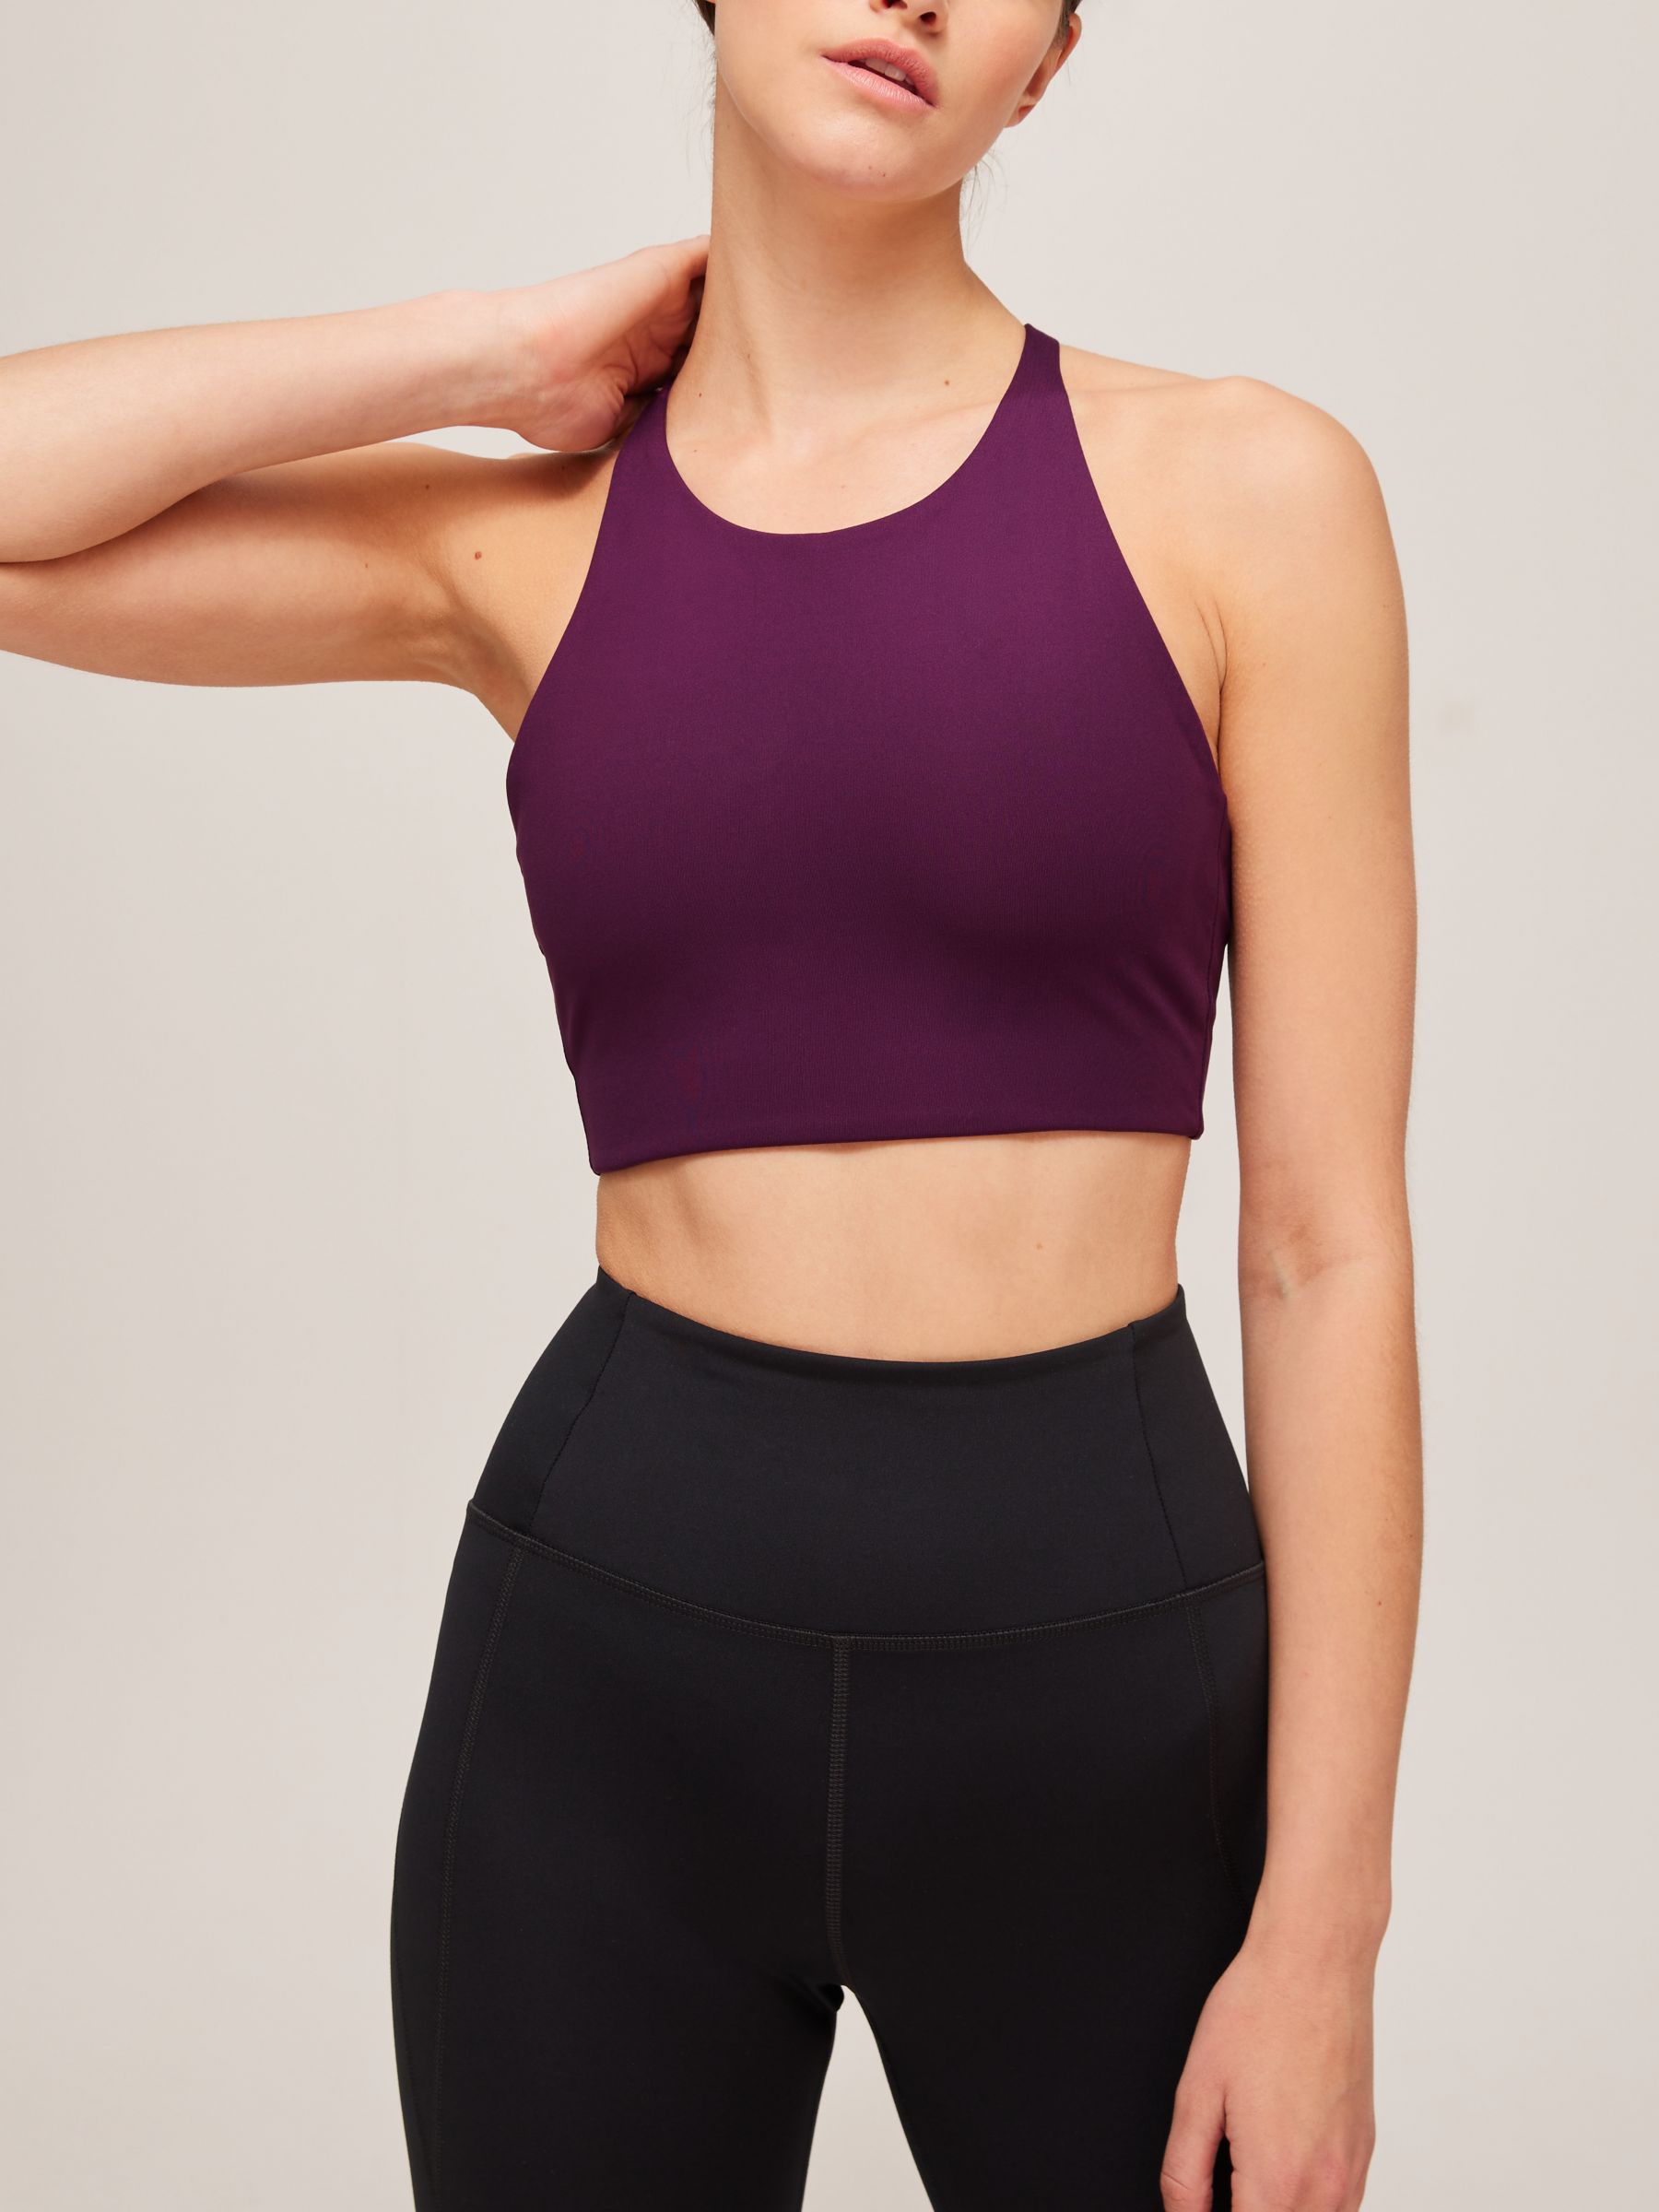 Girlfriend Collective Plum Topanga Bra, Trust Us, You're Going to Want  Some Activewear From Girlfriend Collective